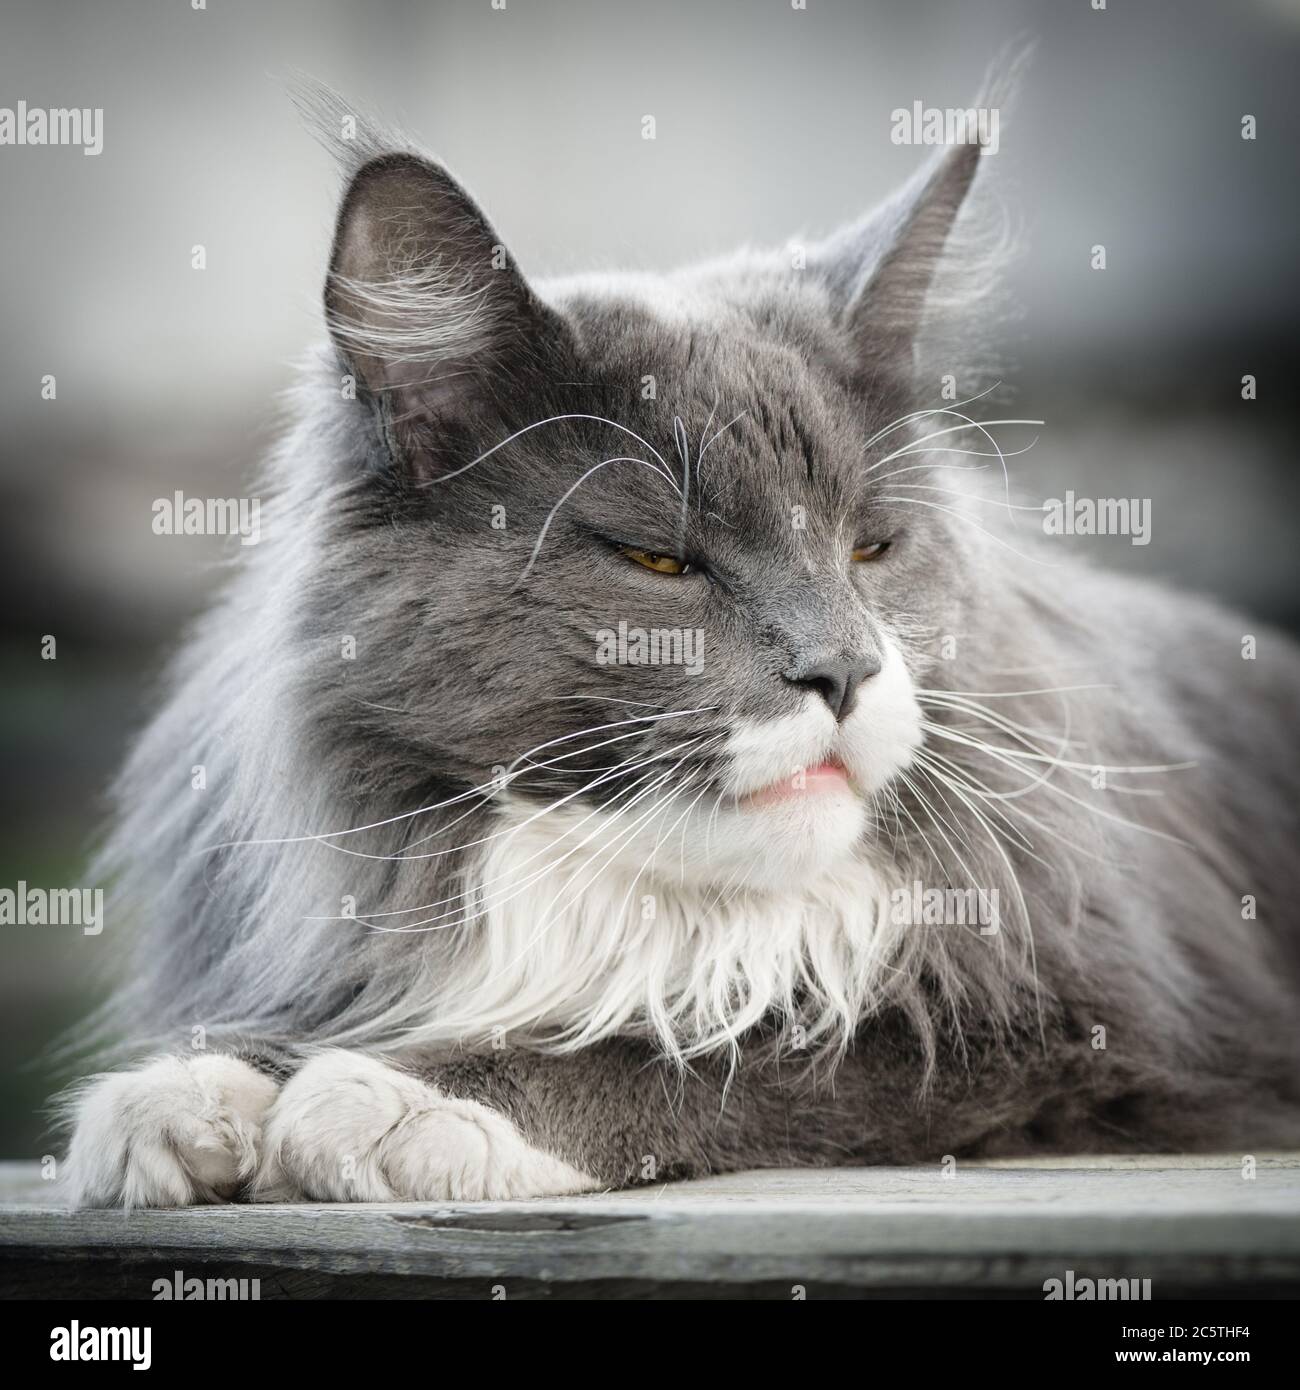 A gray, furry cat lies and looks out into the distance. Stock Photo